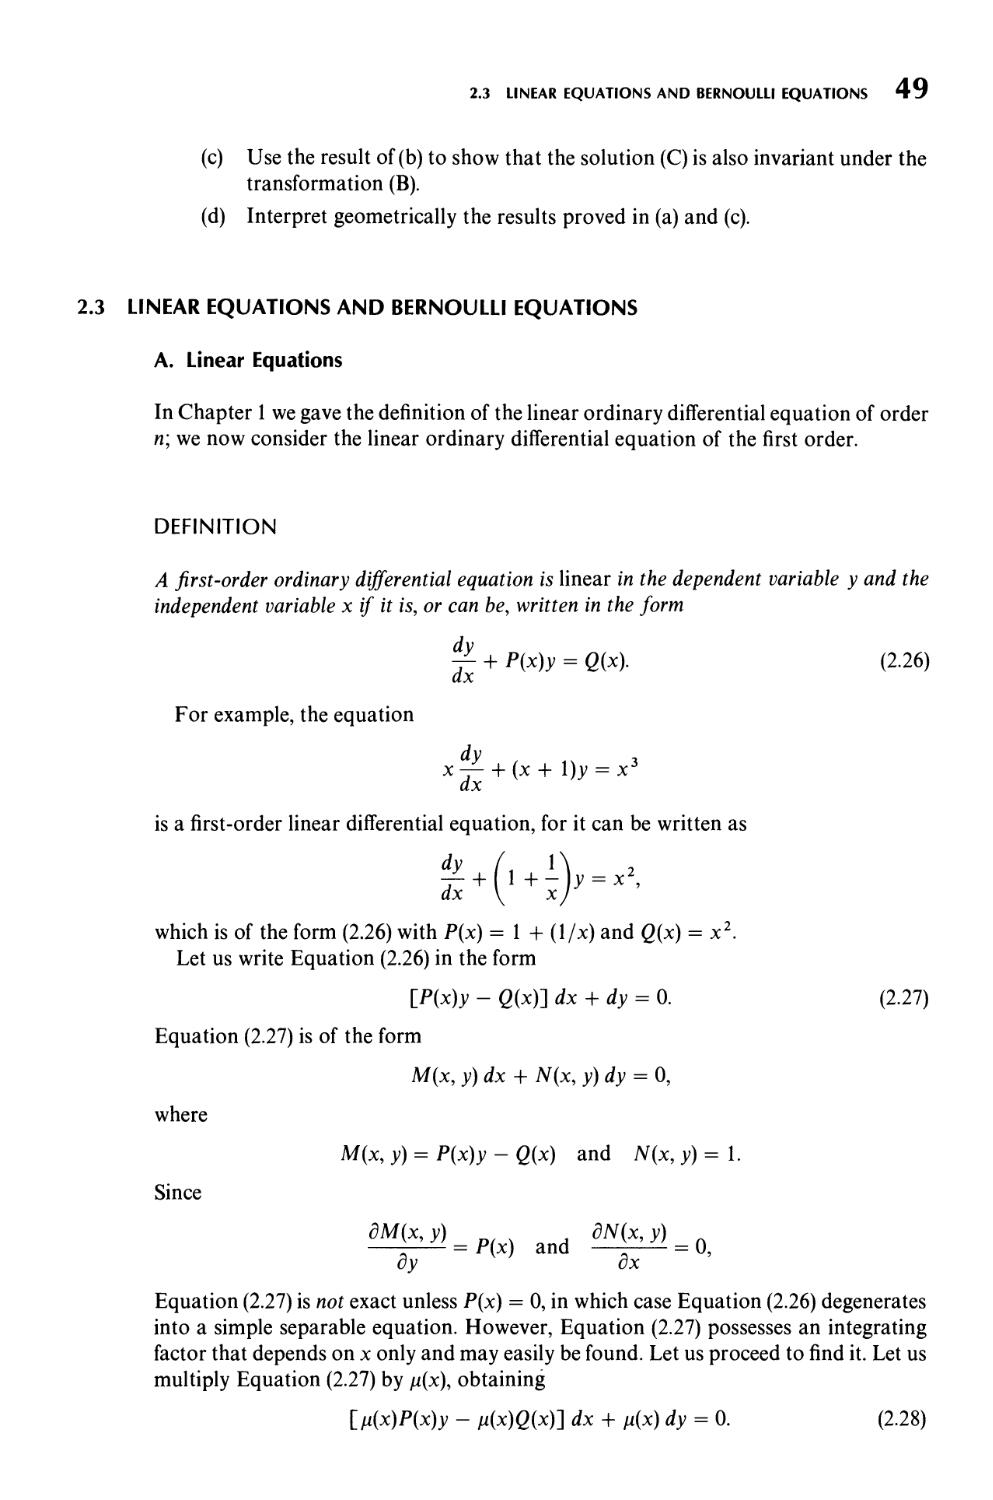 2.3  Linear Equations and Bernoulli Equations